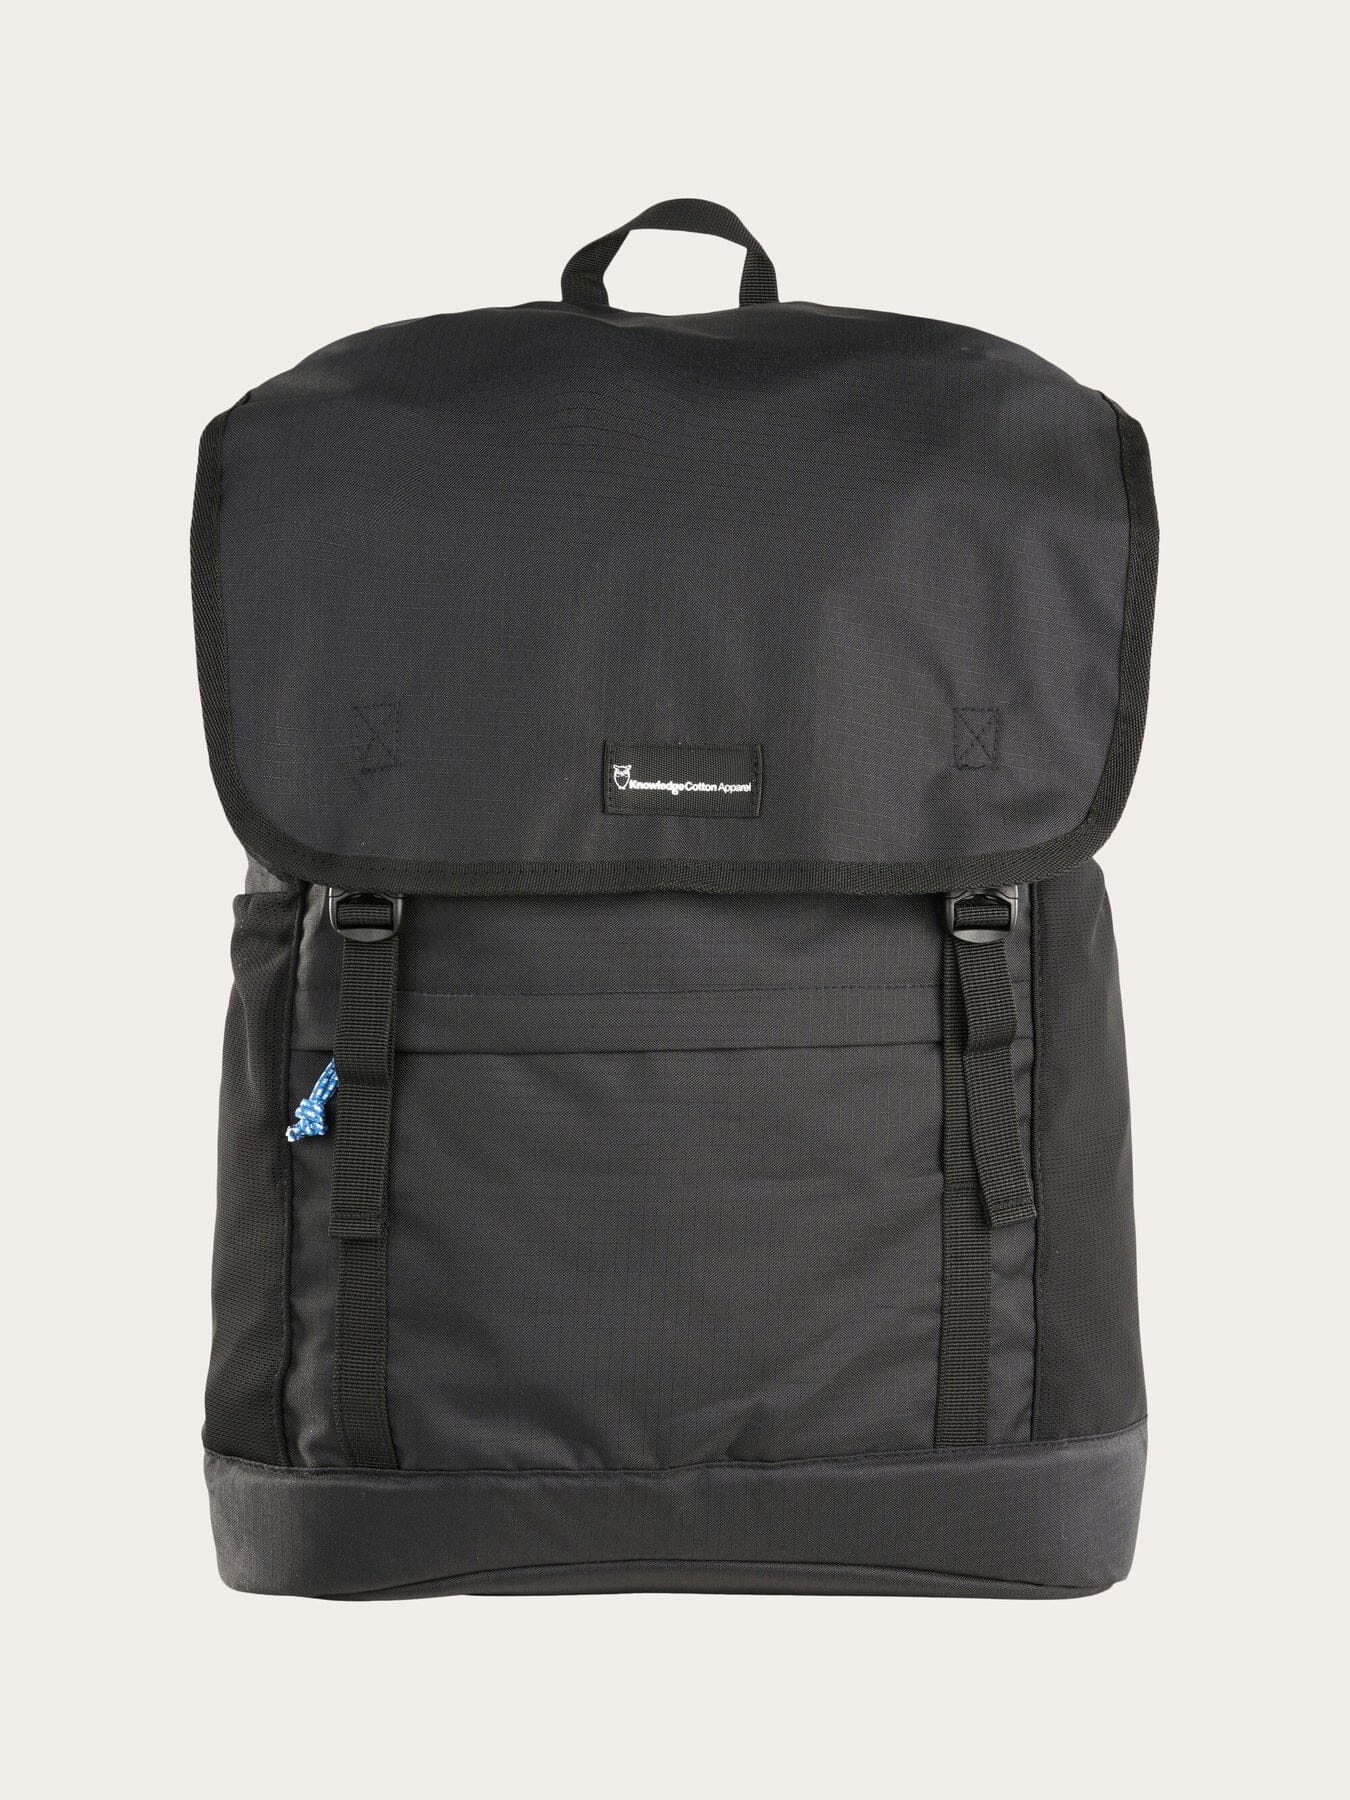 KnowledgeCotton Apparel Classic backpack 30L - Recycled PET Black Jet Bags